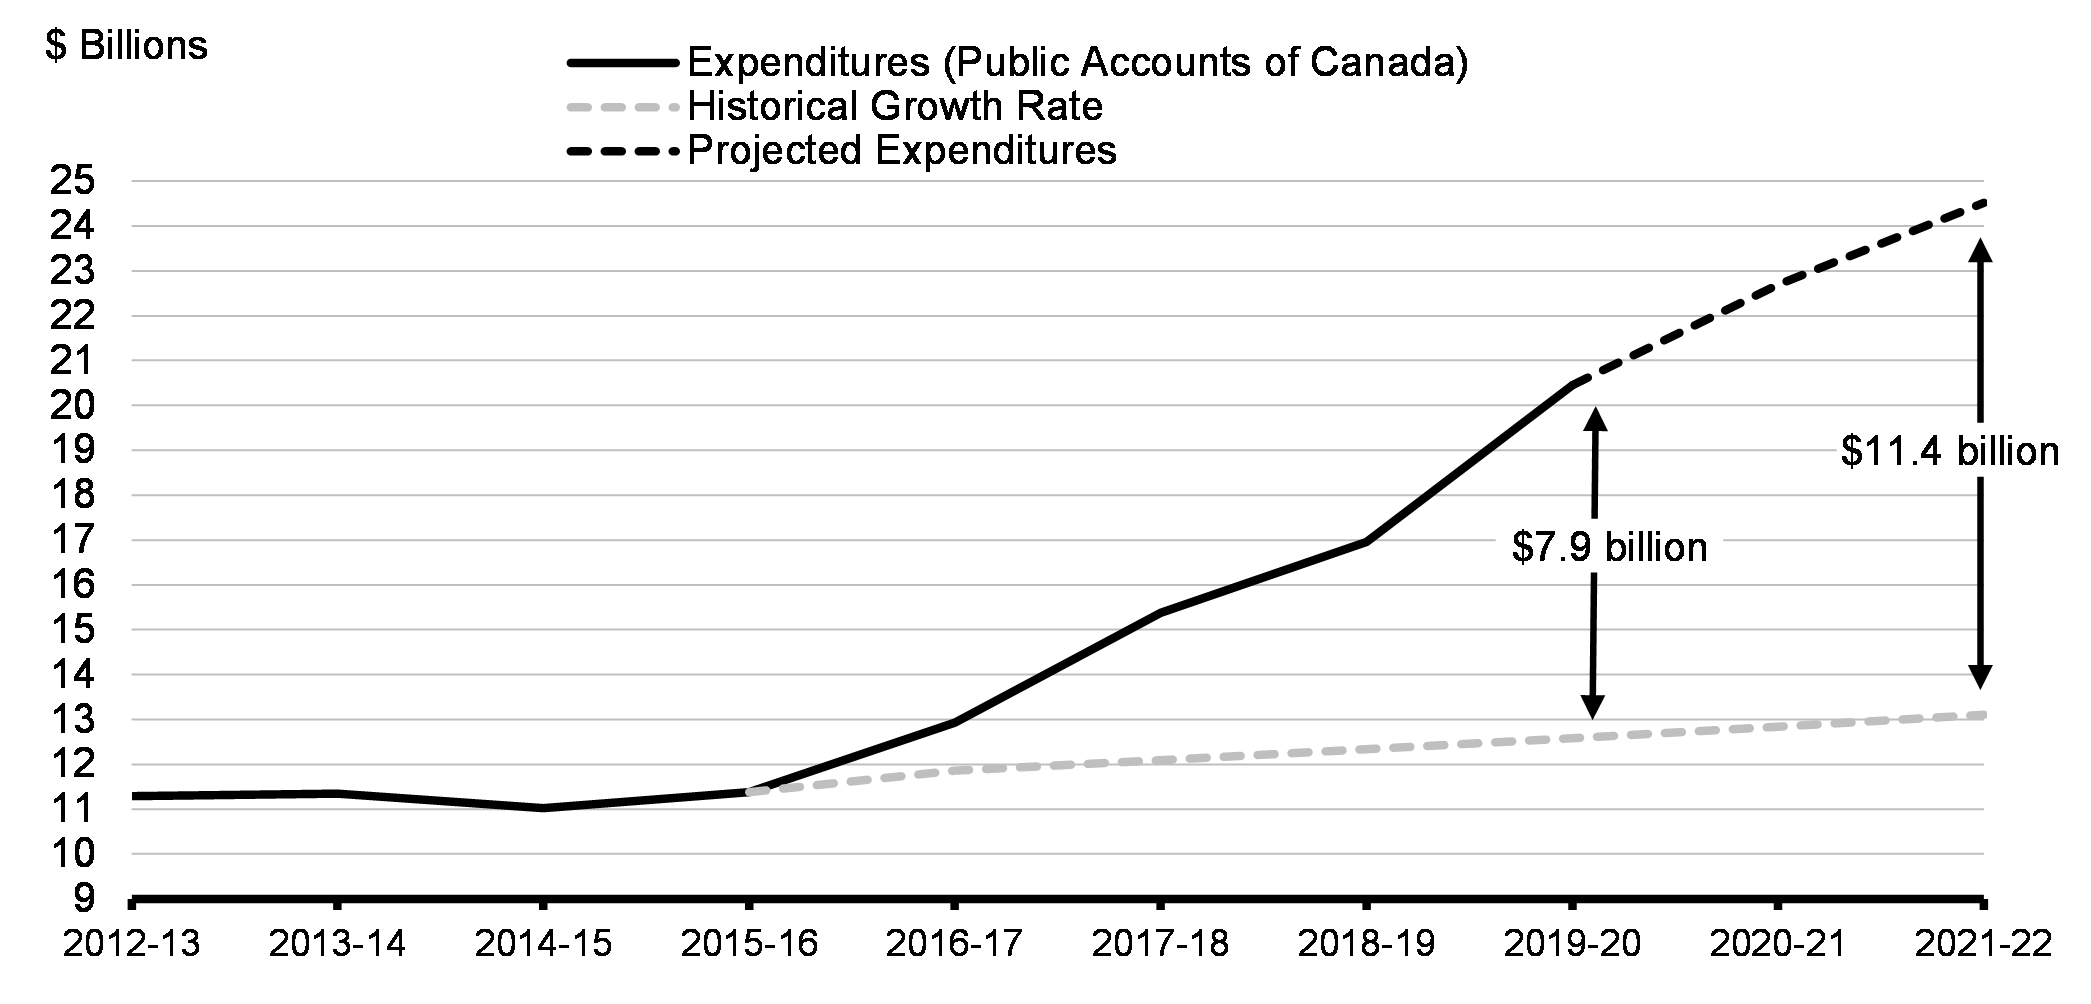 Investments in Indigenous Priorities (Actual and Projected)